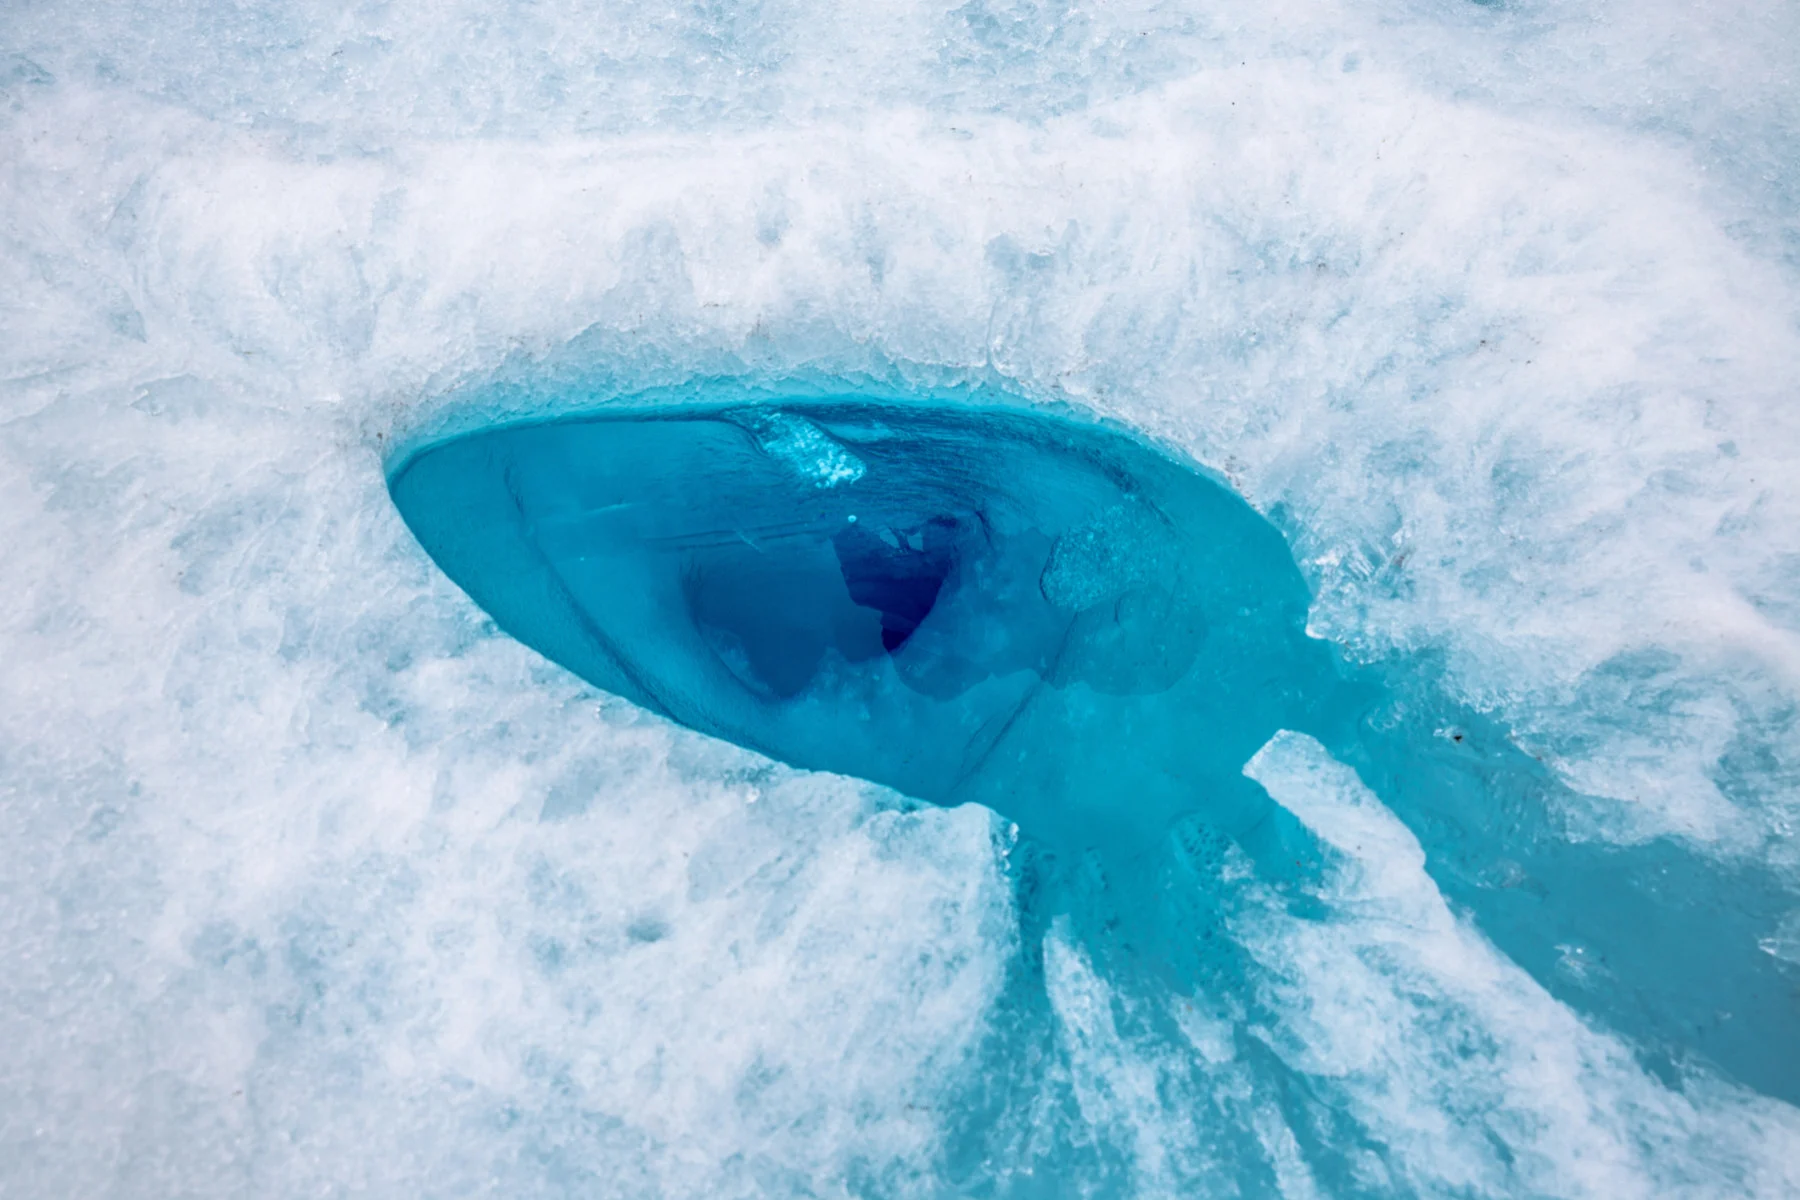 "Water blisters" ​offer a glimpse beneath Greenland’s thick ice sheet